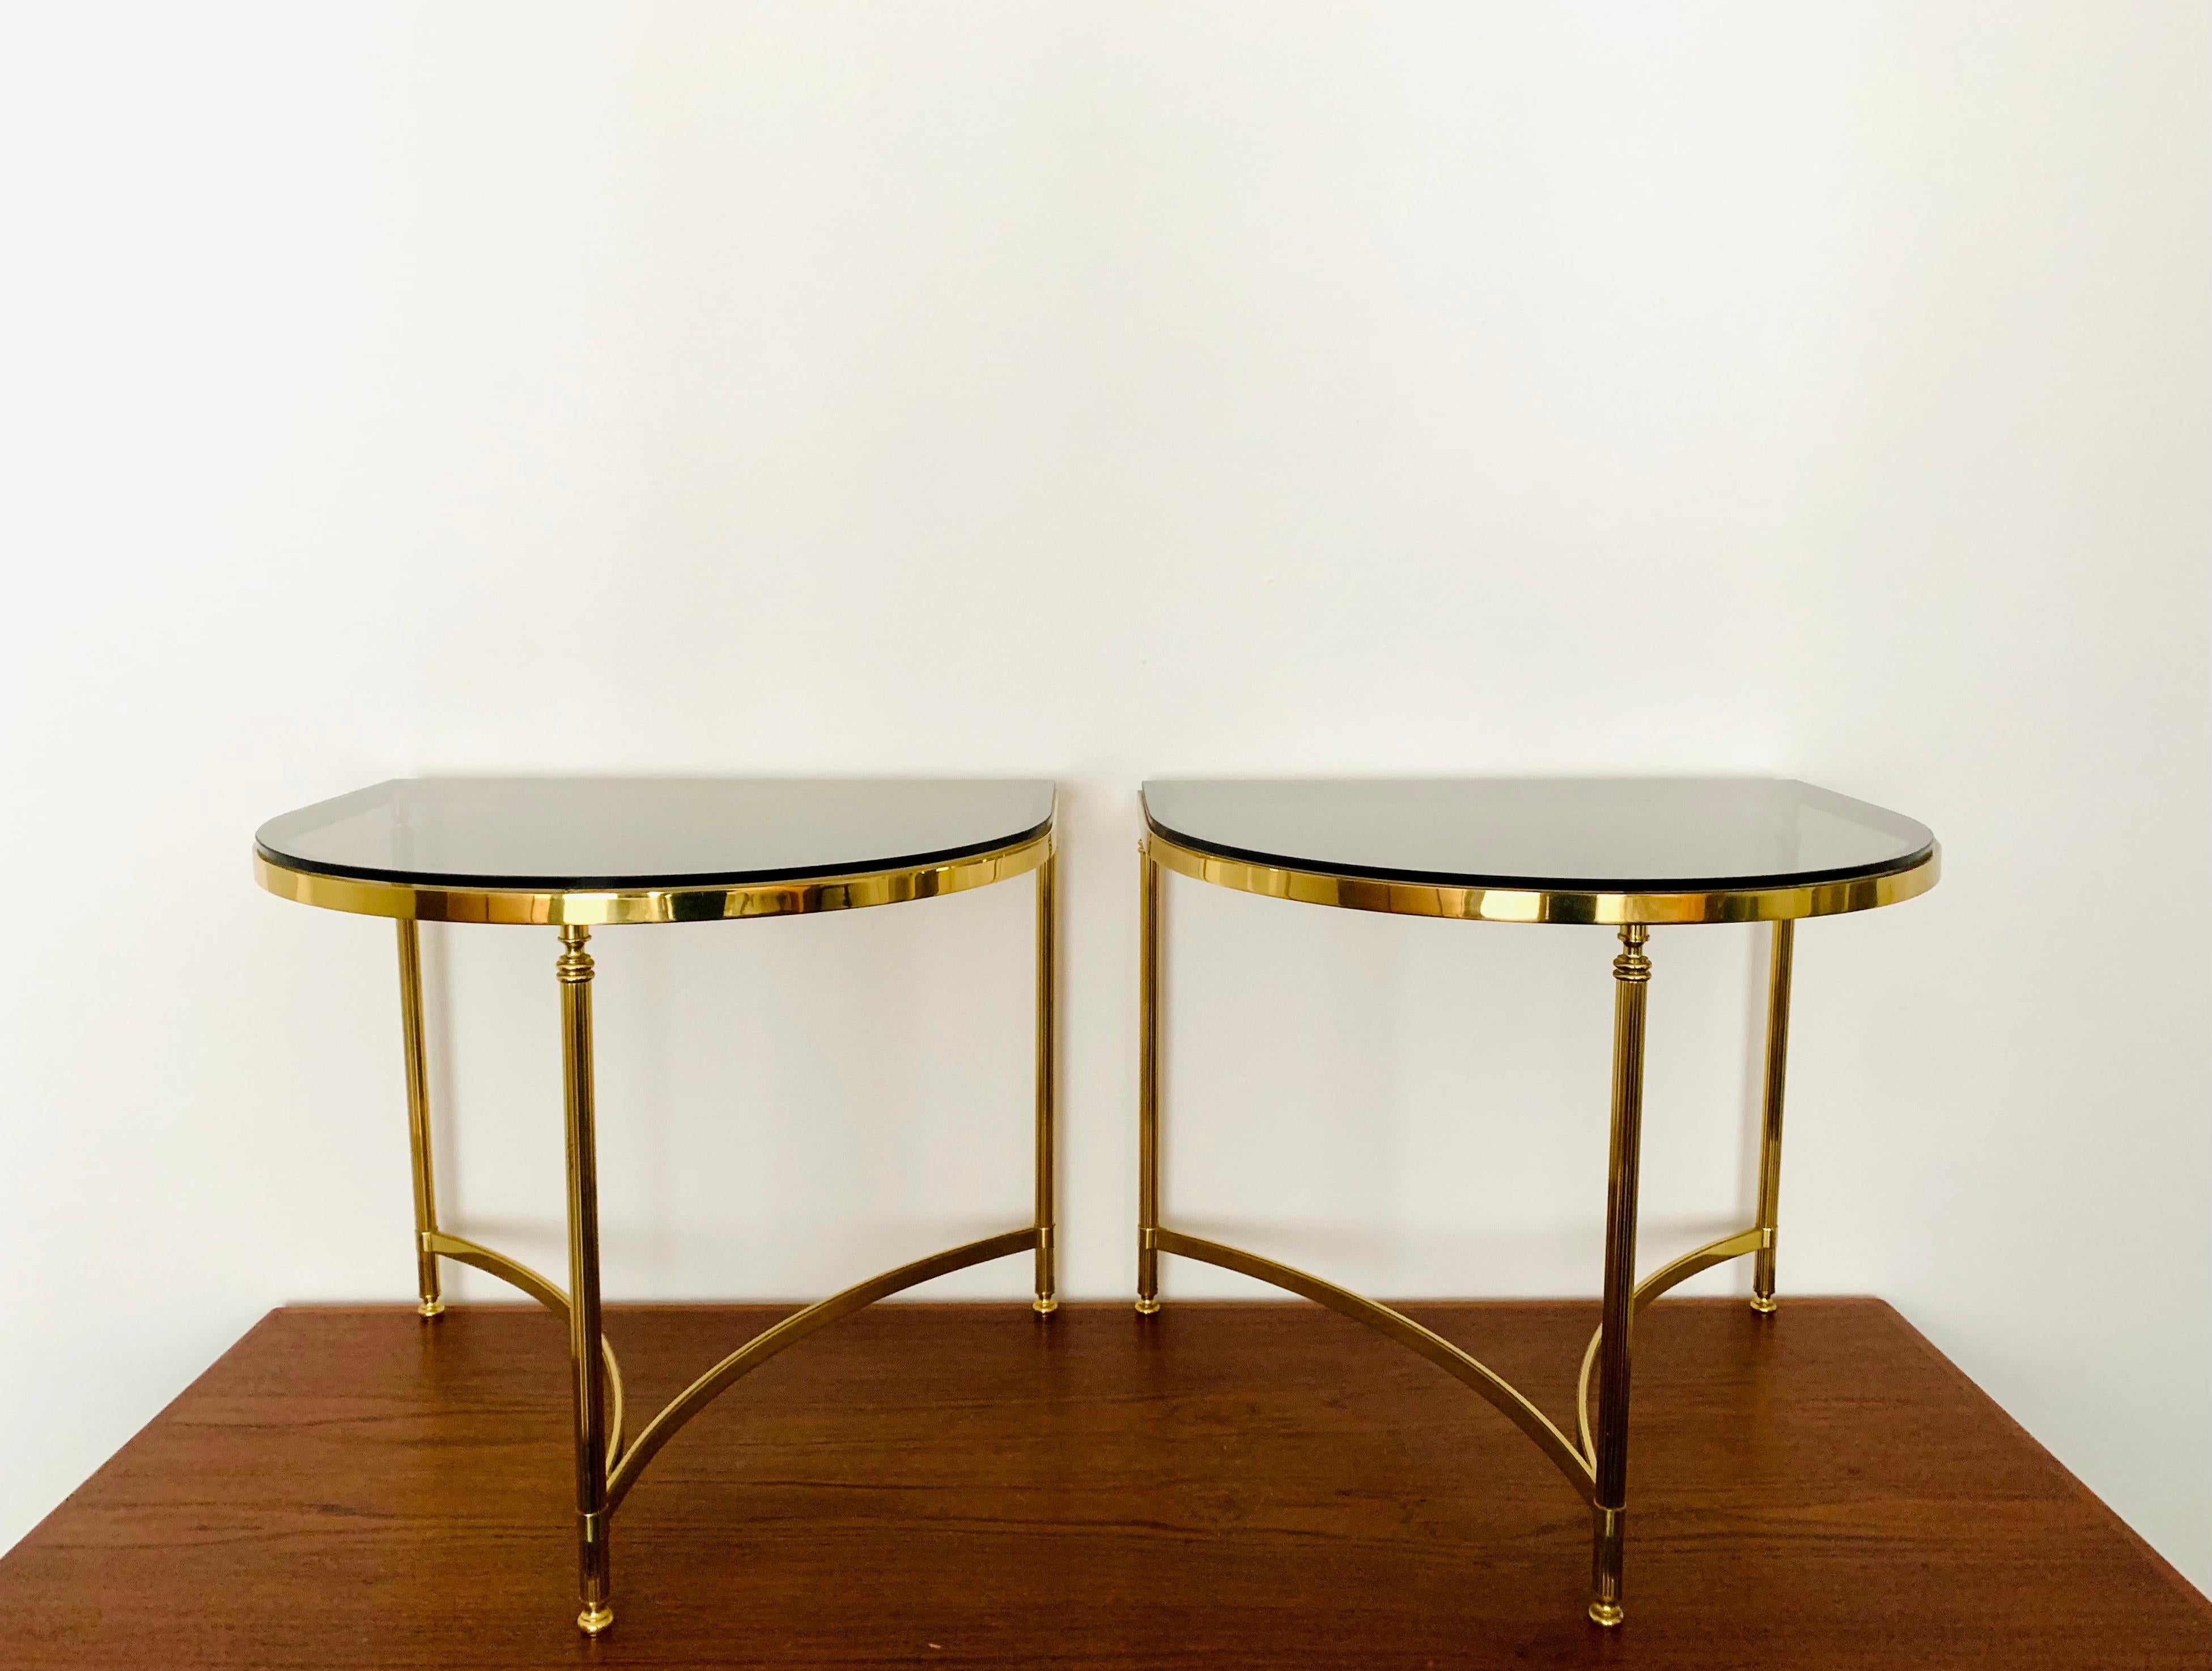 Very nice side tables from the 1960s.
Due to the design and the high-quality workmanship, the tables give every room a touch of luxury.

Manufacturer: Vereinigte Werkstätten München

Condition:

Very good vintage condition with slight signs